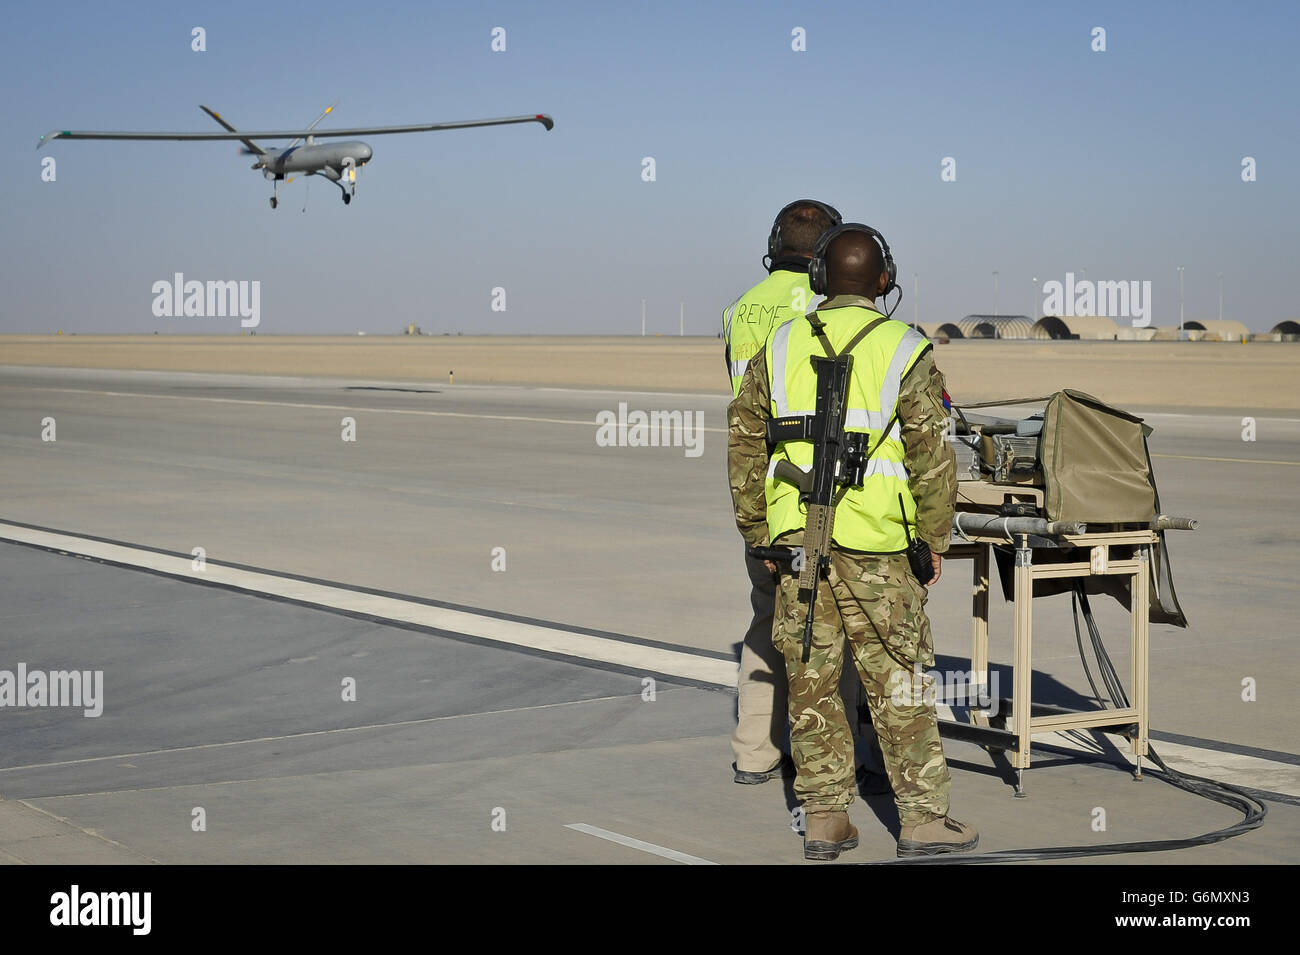 Ground crew remotely control a Hermes 450 Unmanned Aerial System (UAS), which is a remotely controlled reconnaissance aircraft, as it takes off at Camp Bastion airfield, Helmand Province, Afghanistan. Stock Photo